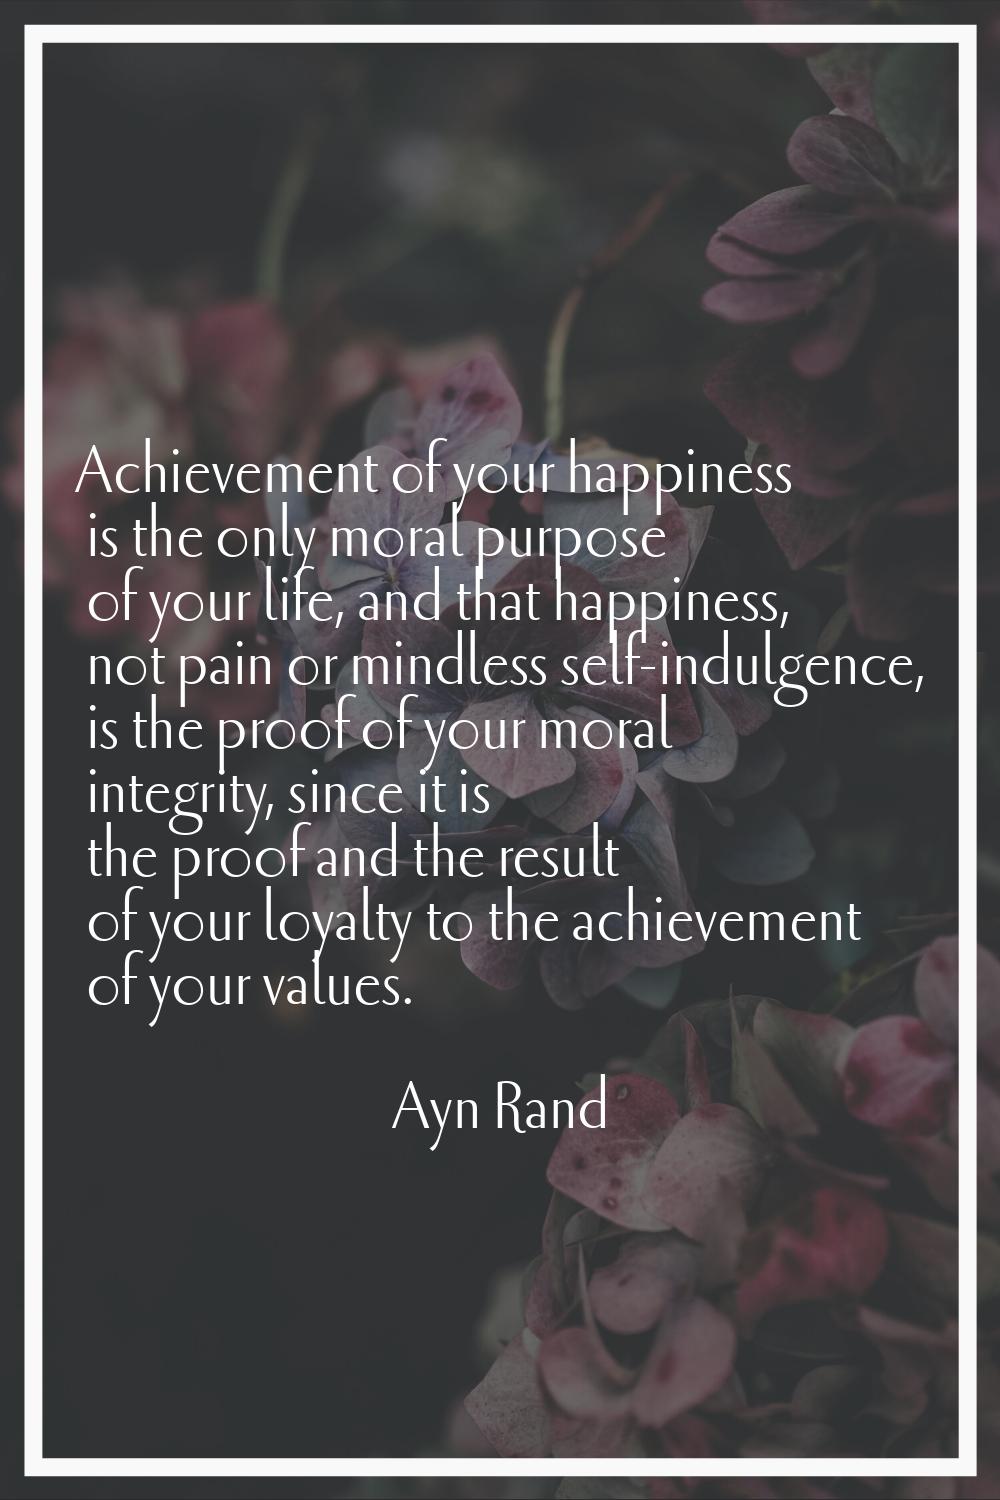 Achievement of your happiness is the only moral purpose of your life, and that happiness, not pain 